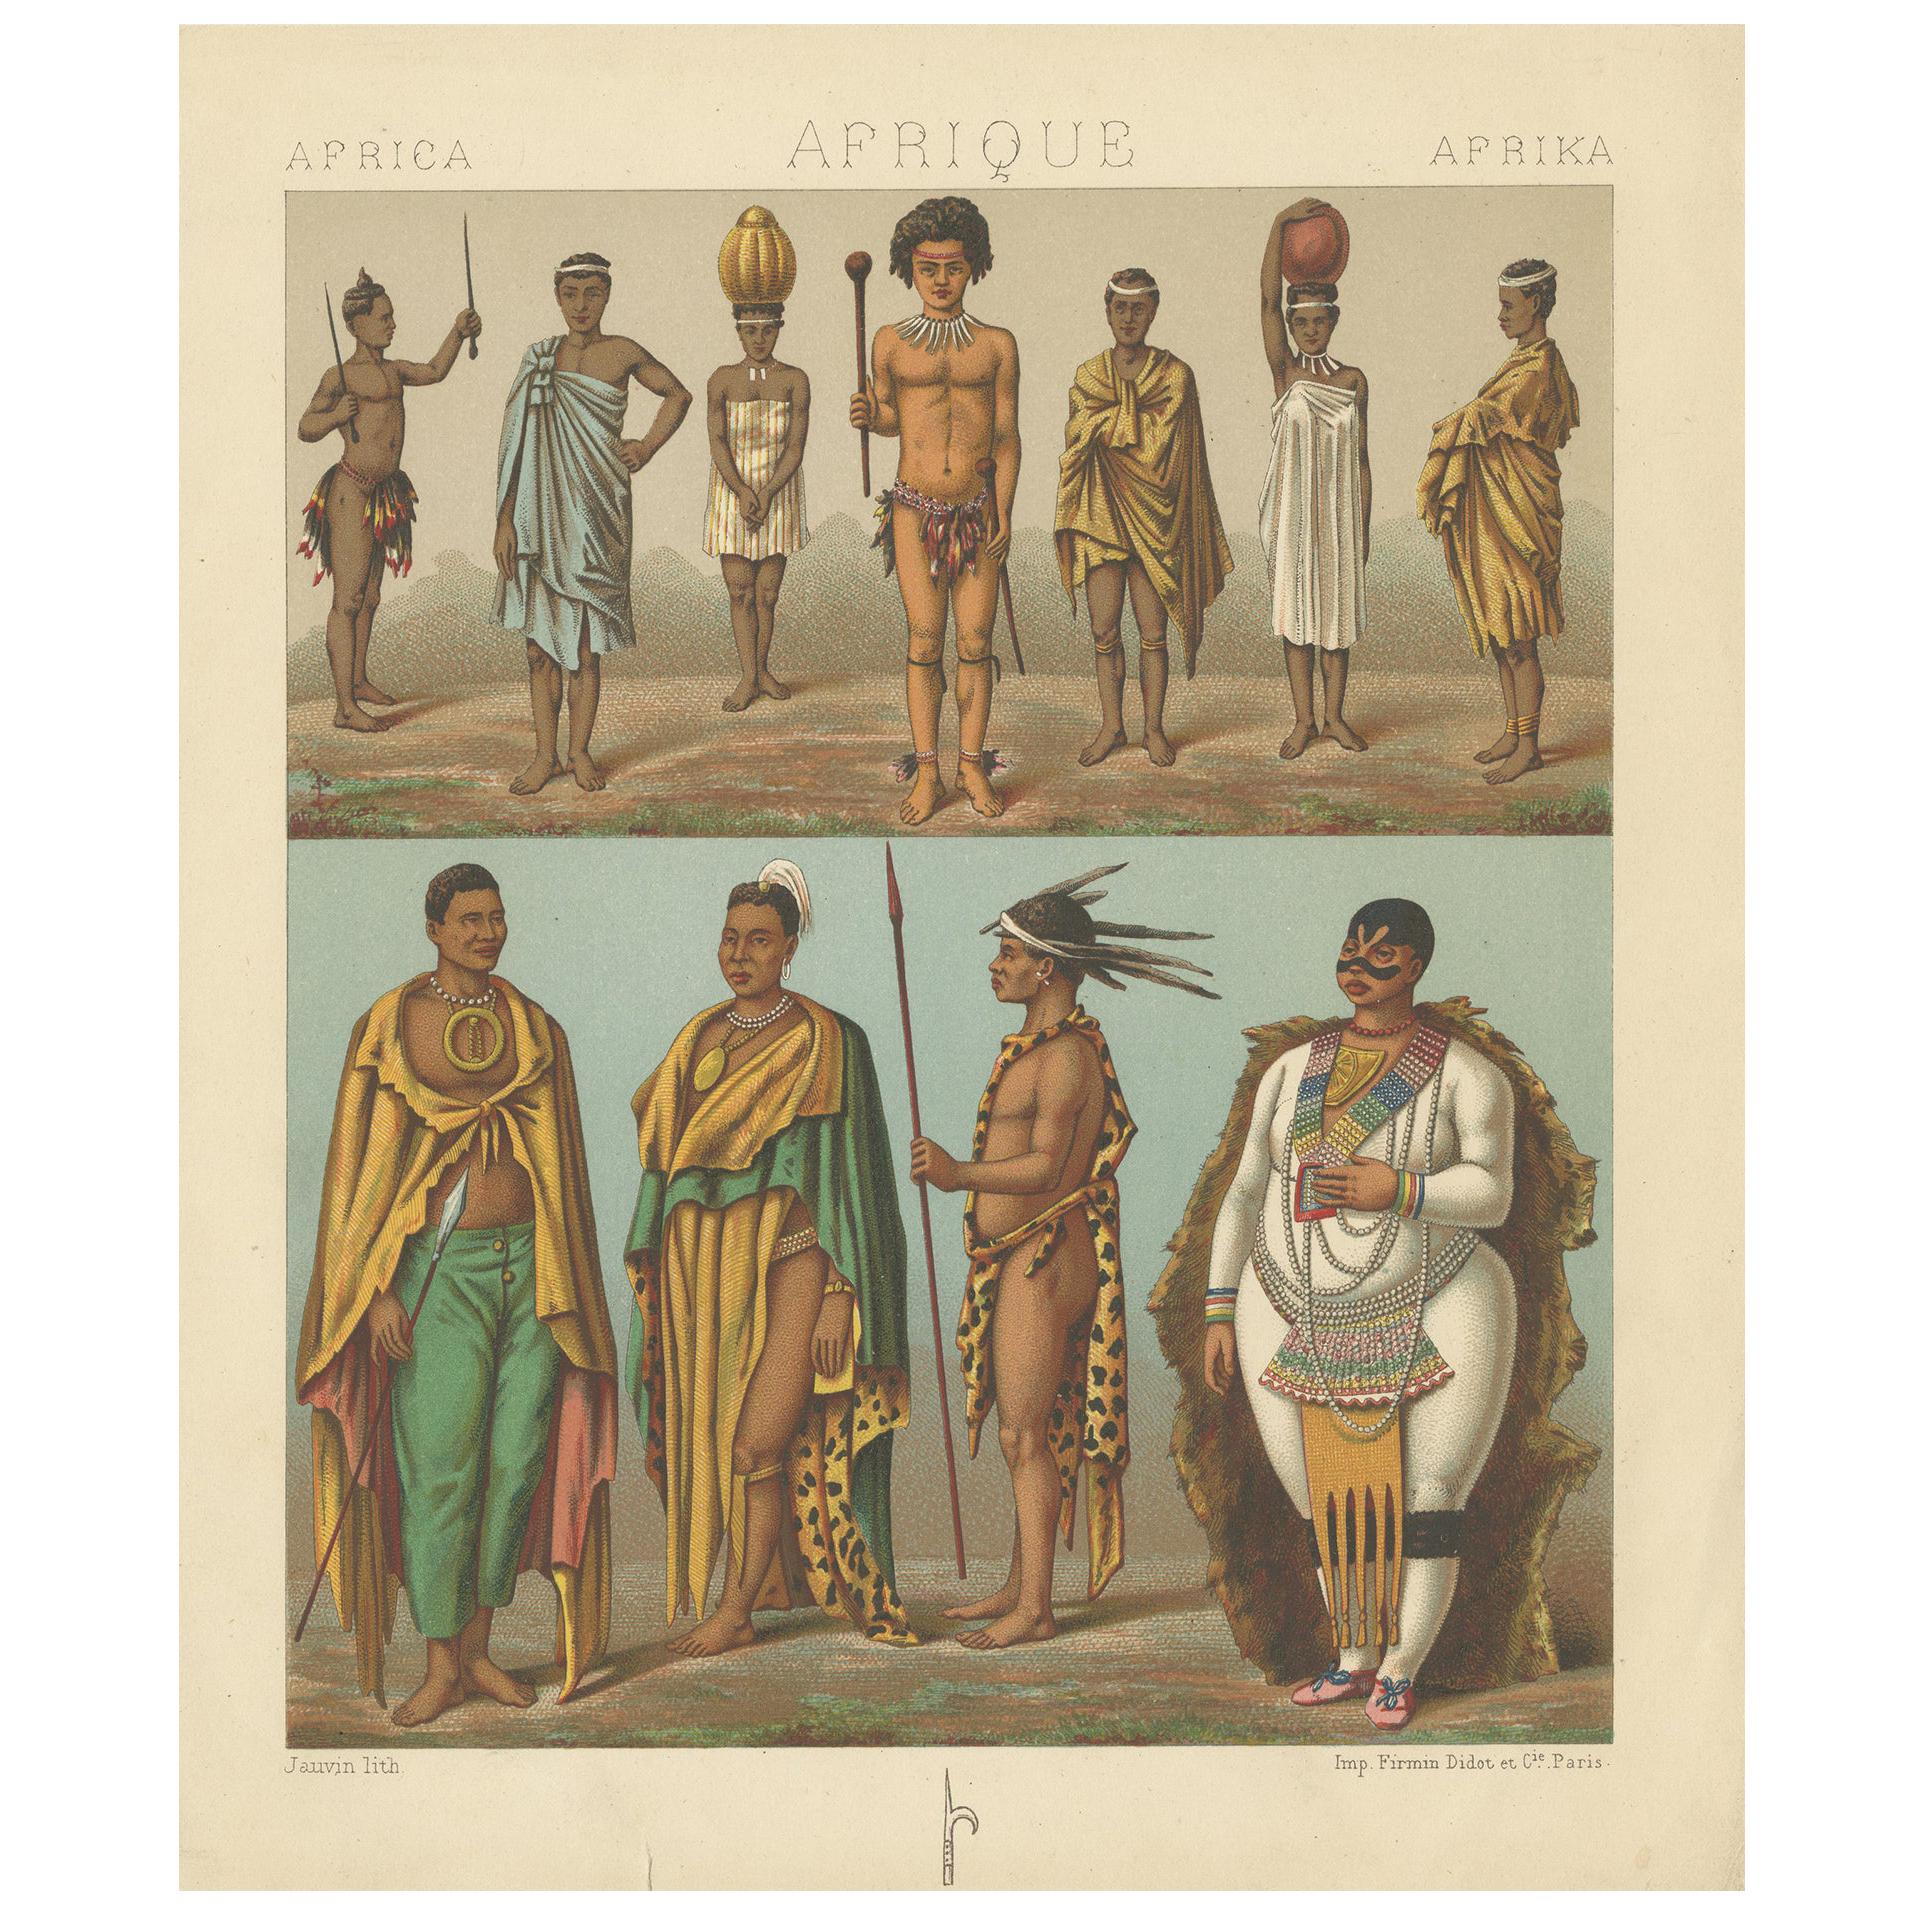 Antique Print of South African Tribes by Racinet, 1888